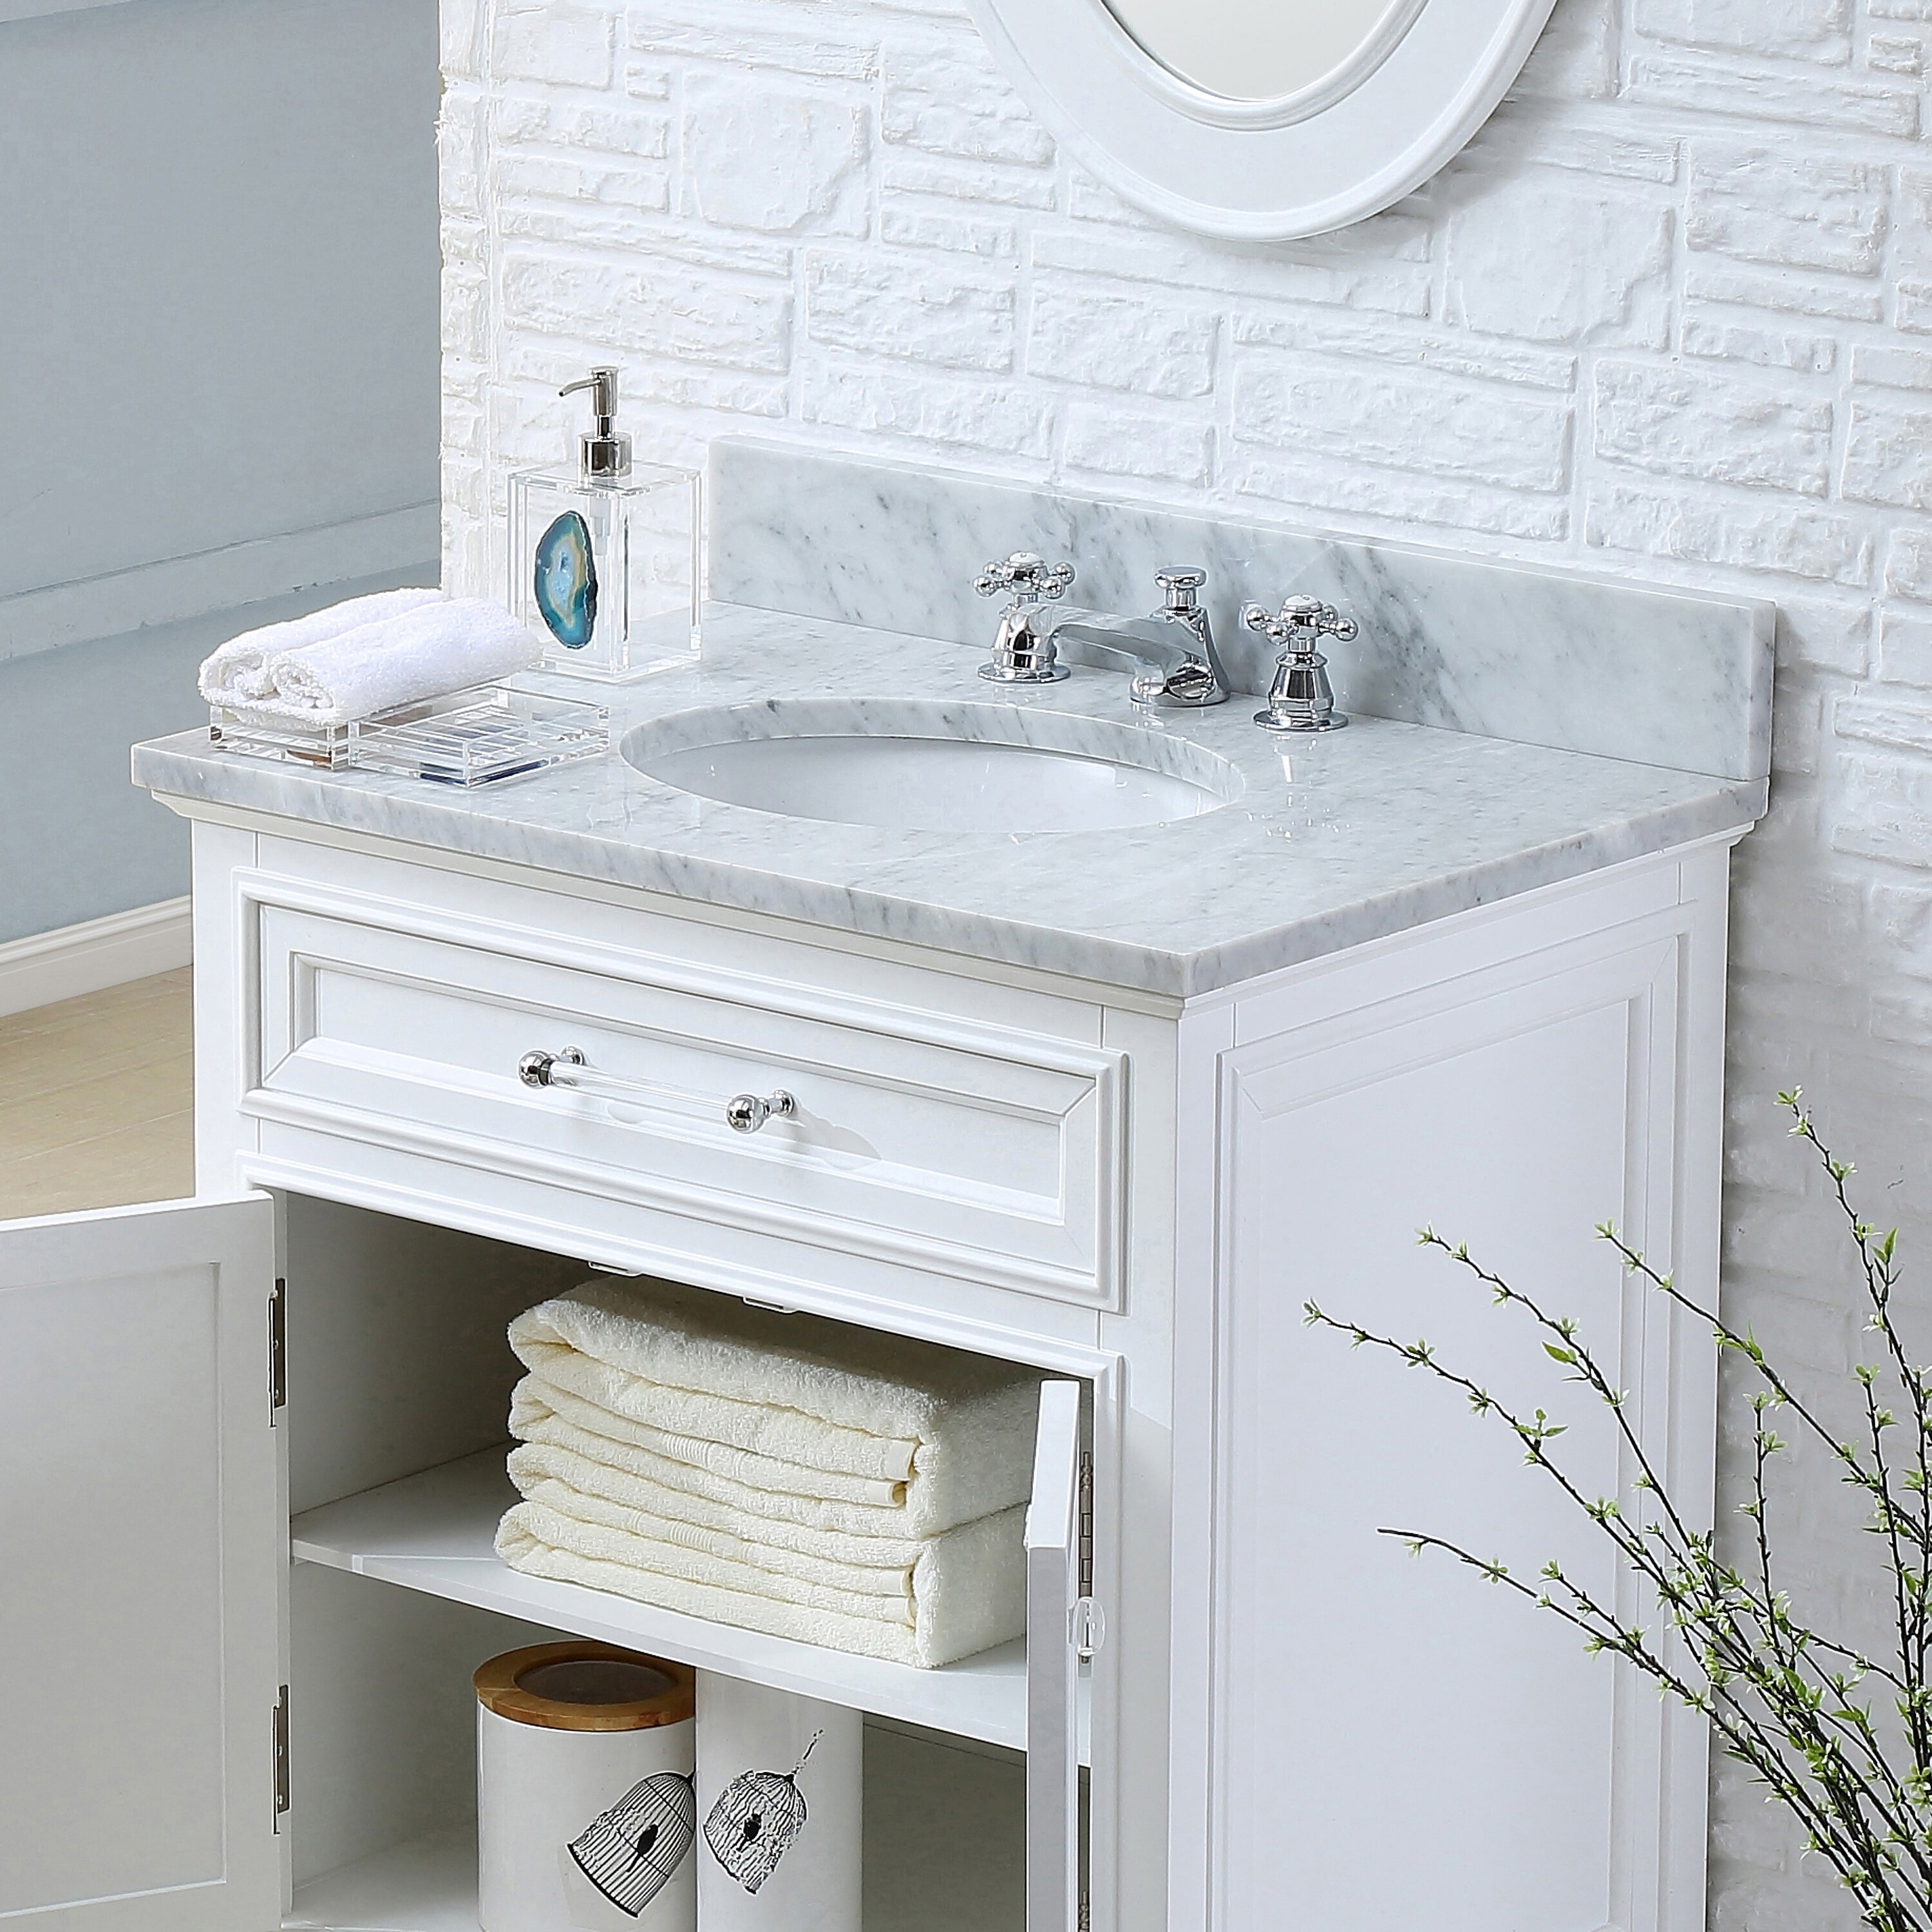 Darby Home Co Colchester 30 Single Sink Bathroom Vanity Set White And Reviews Wayfair 1172